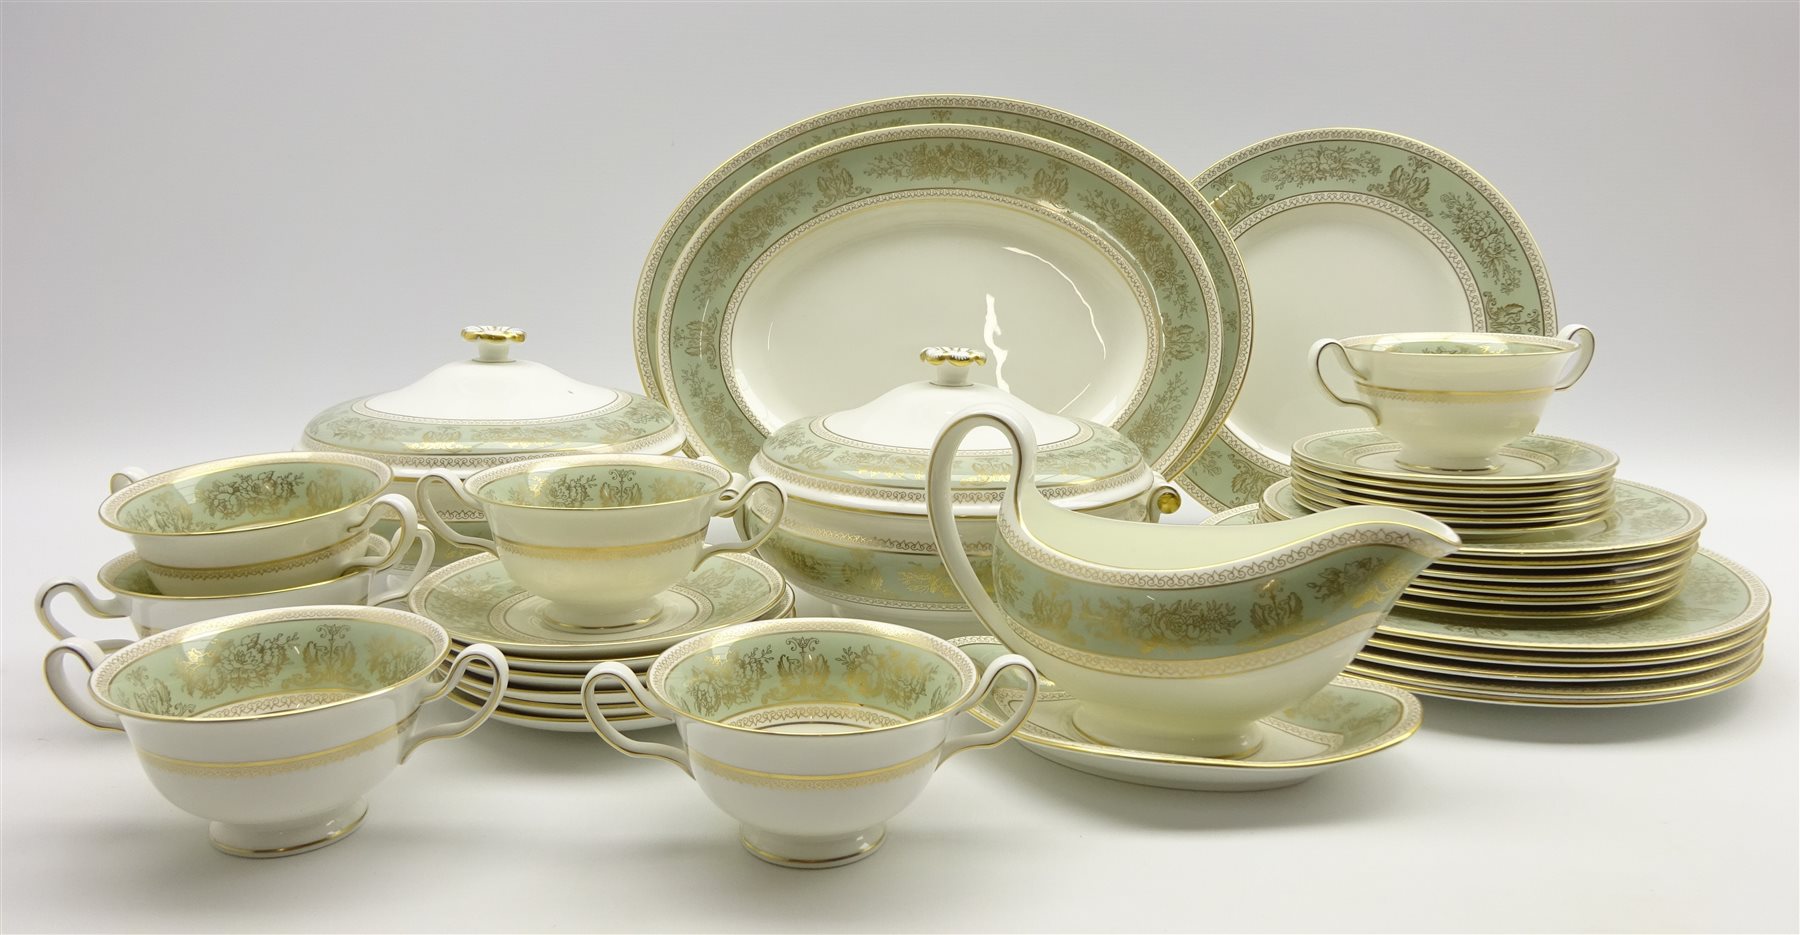 Wedgwood 'Gold Columbia' sage green pattern dinner service 